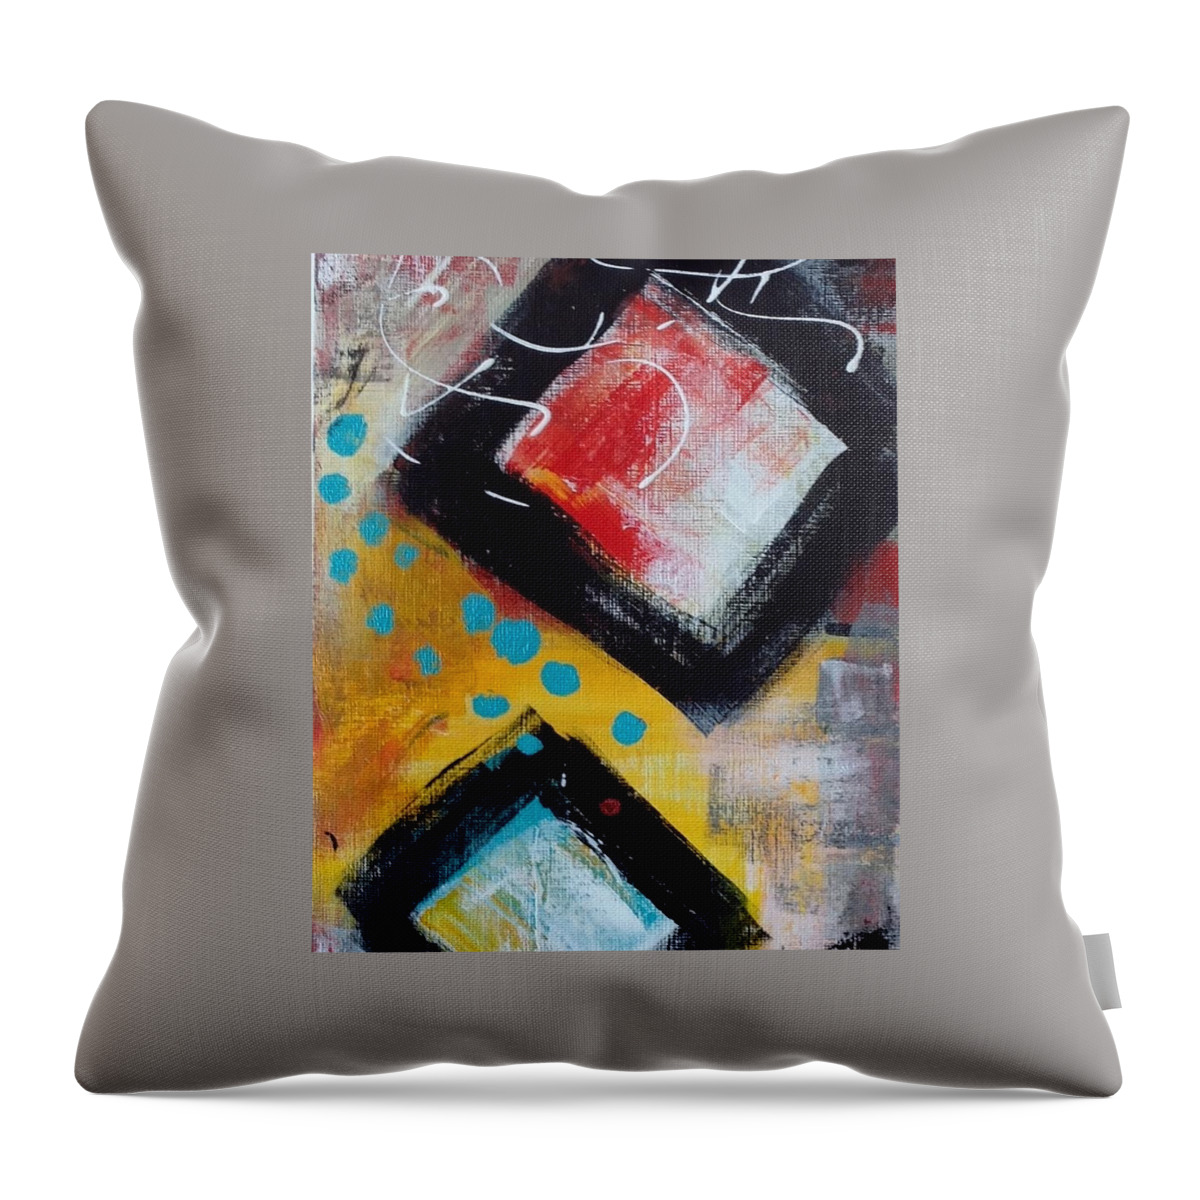 Abstractart Throw Pillow featuring the painting Suggestion by Suzzanna Frank